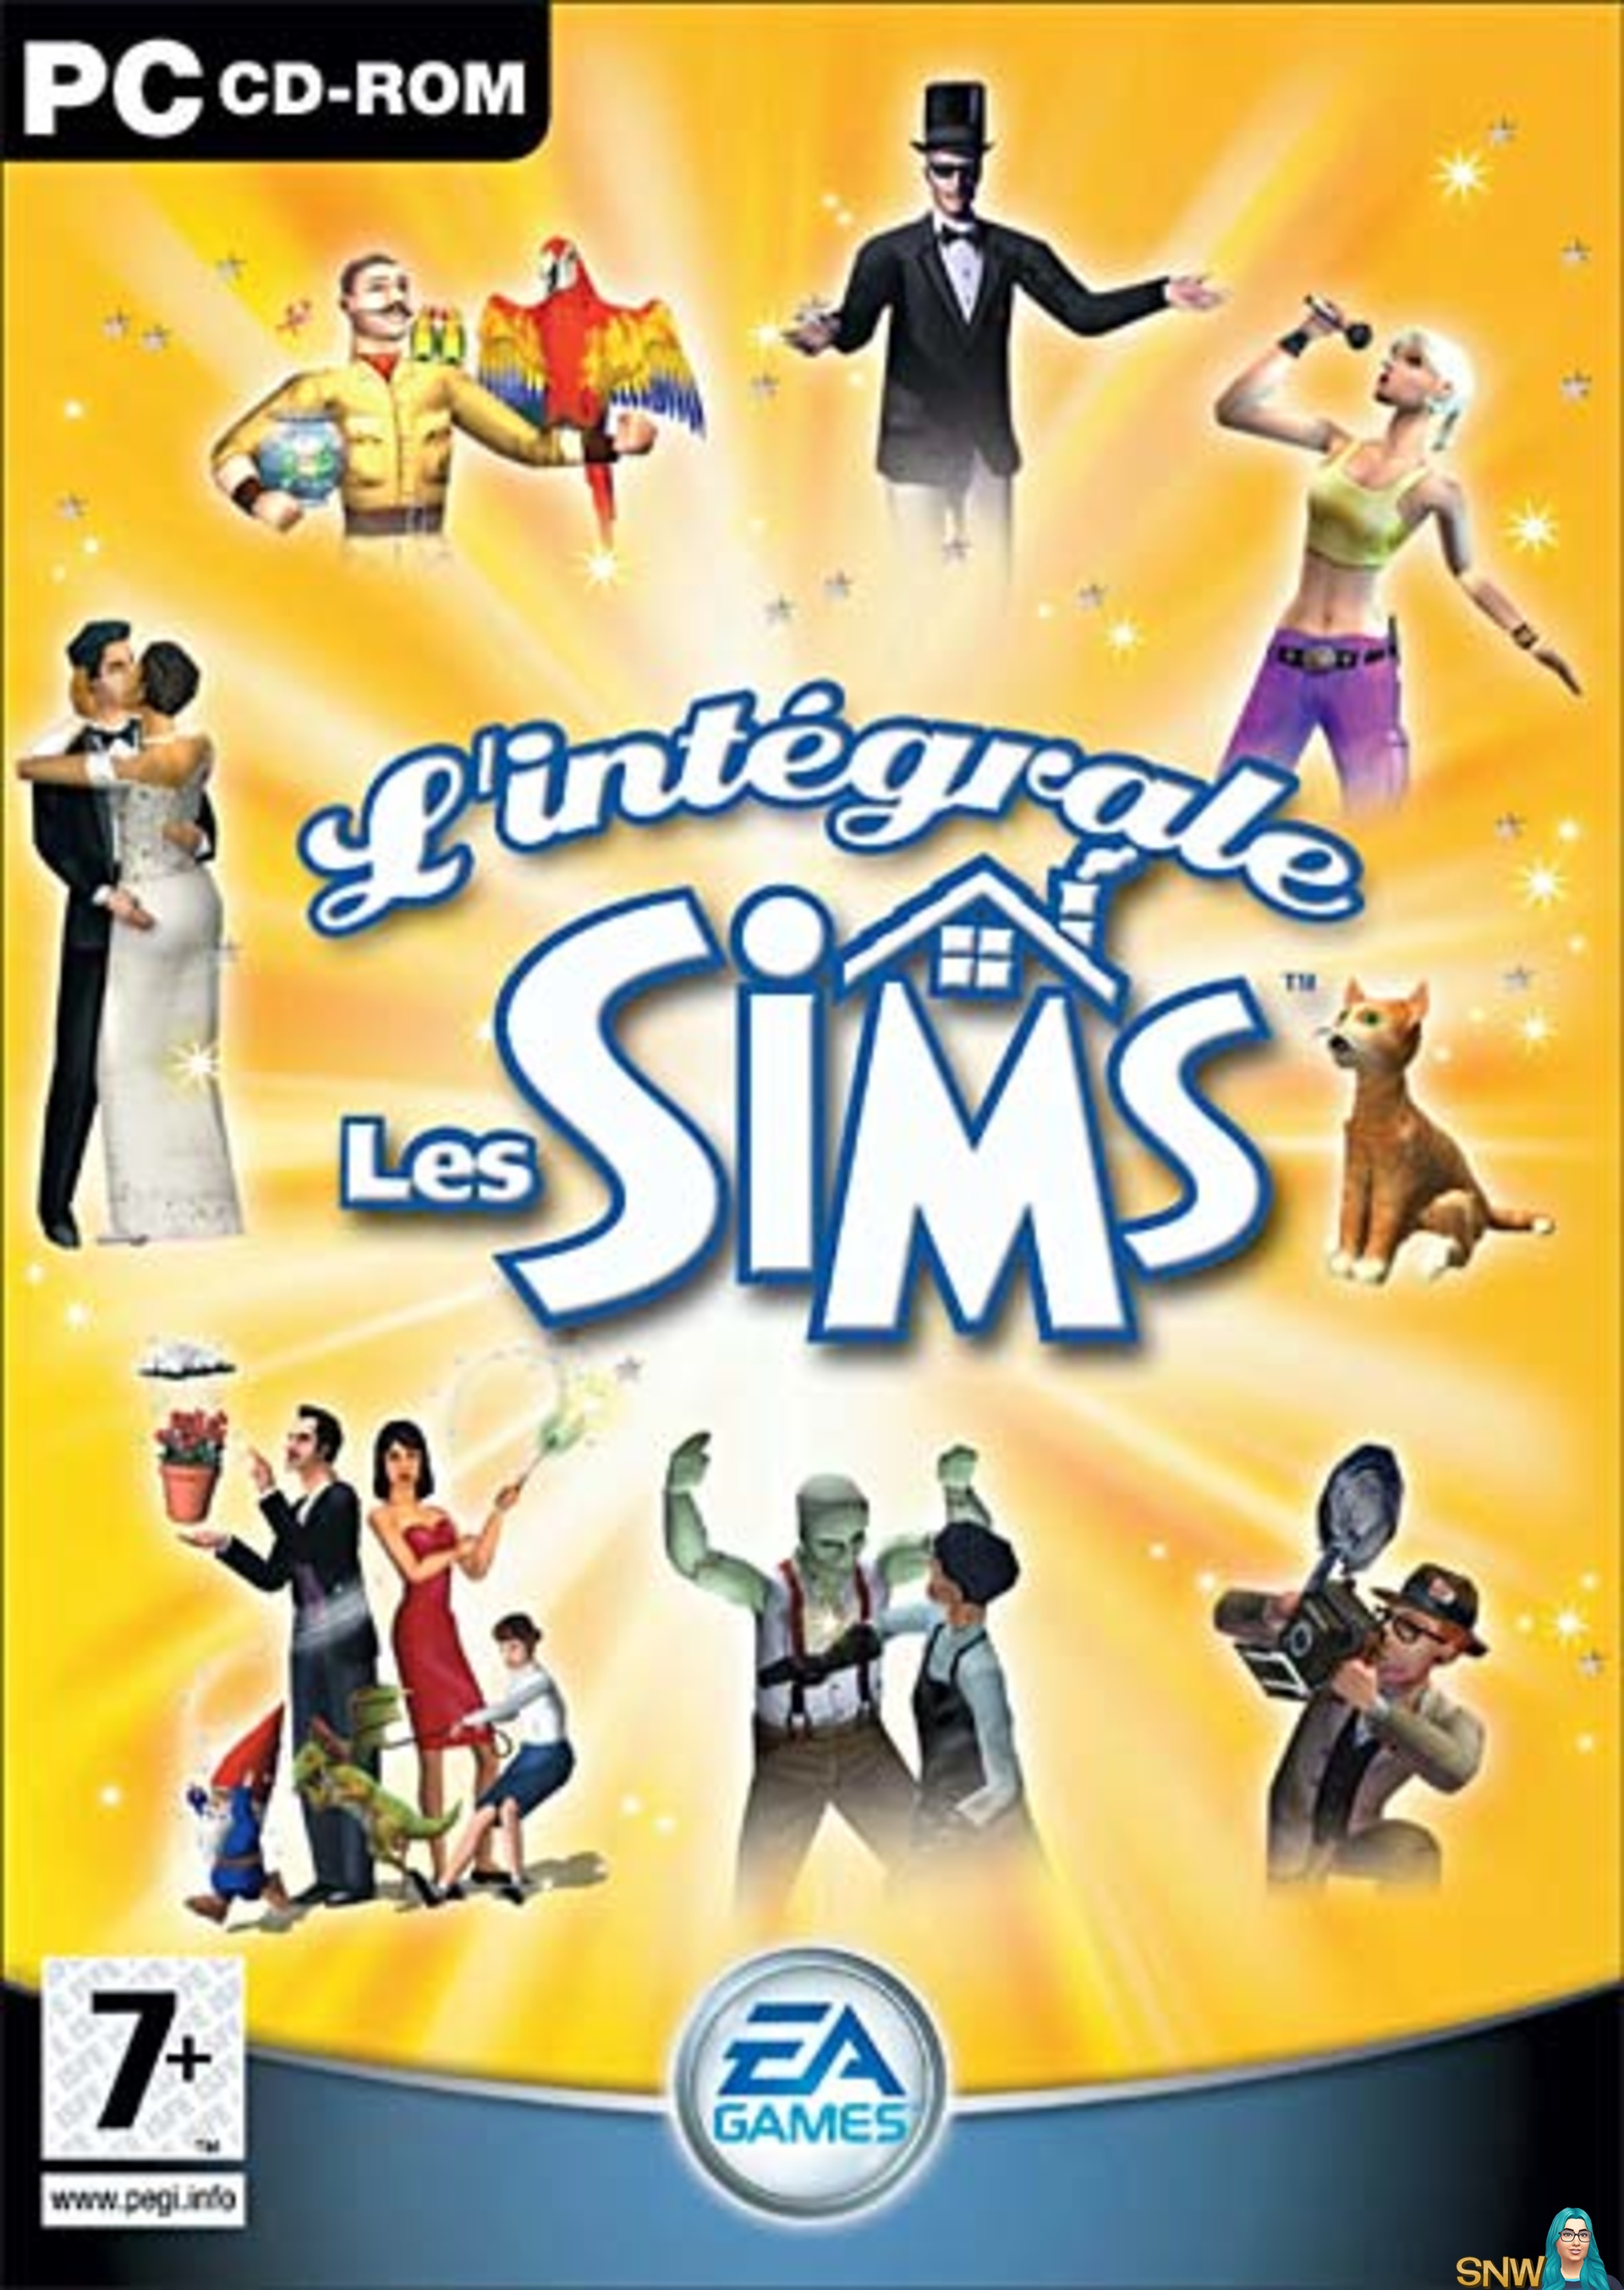 sims 3 full collection